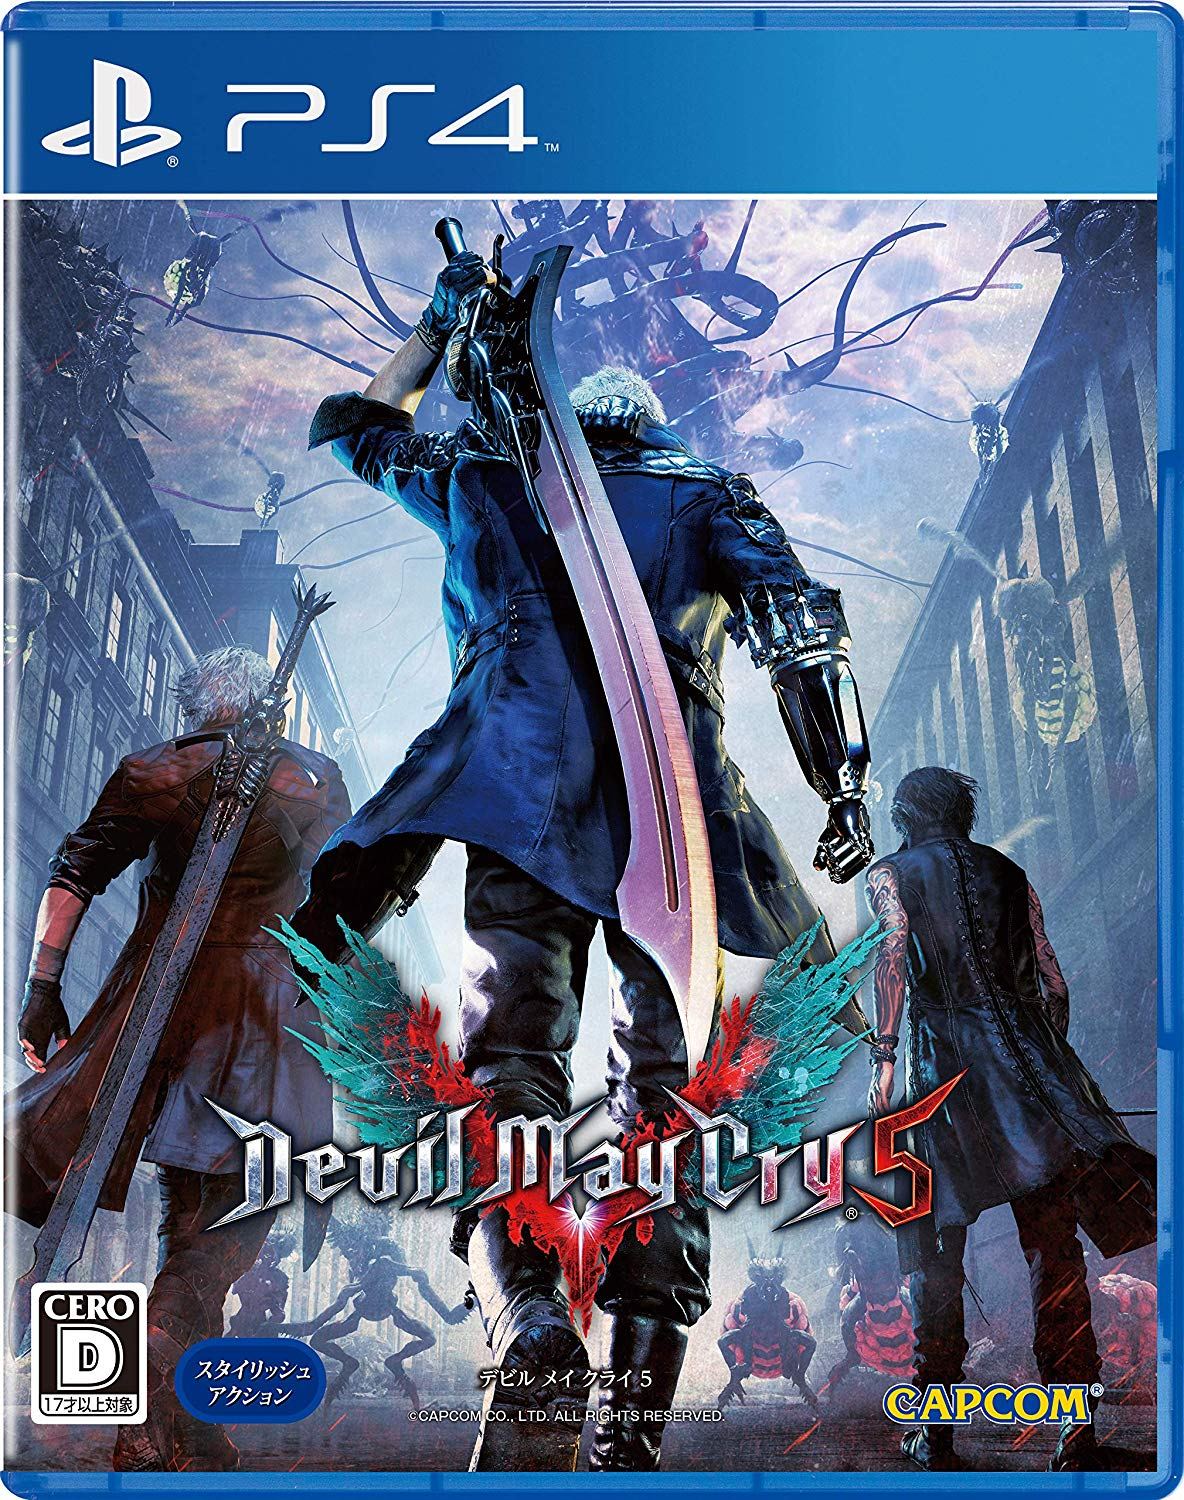 Devil May Cry 5 for PlayStation 4